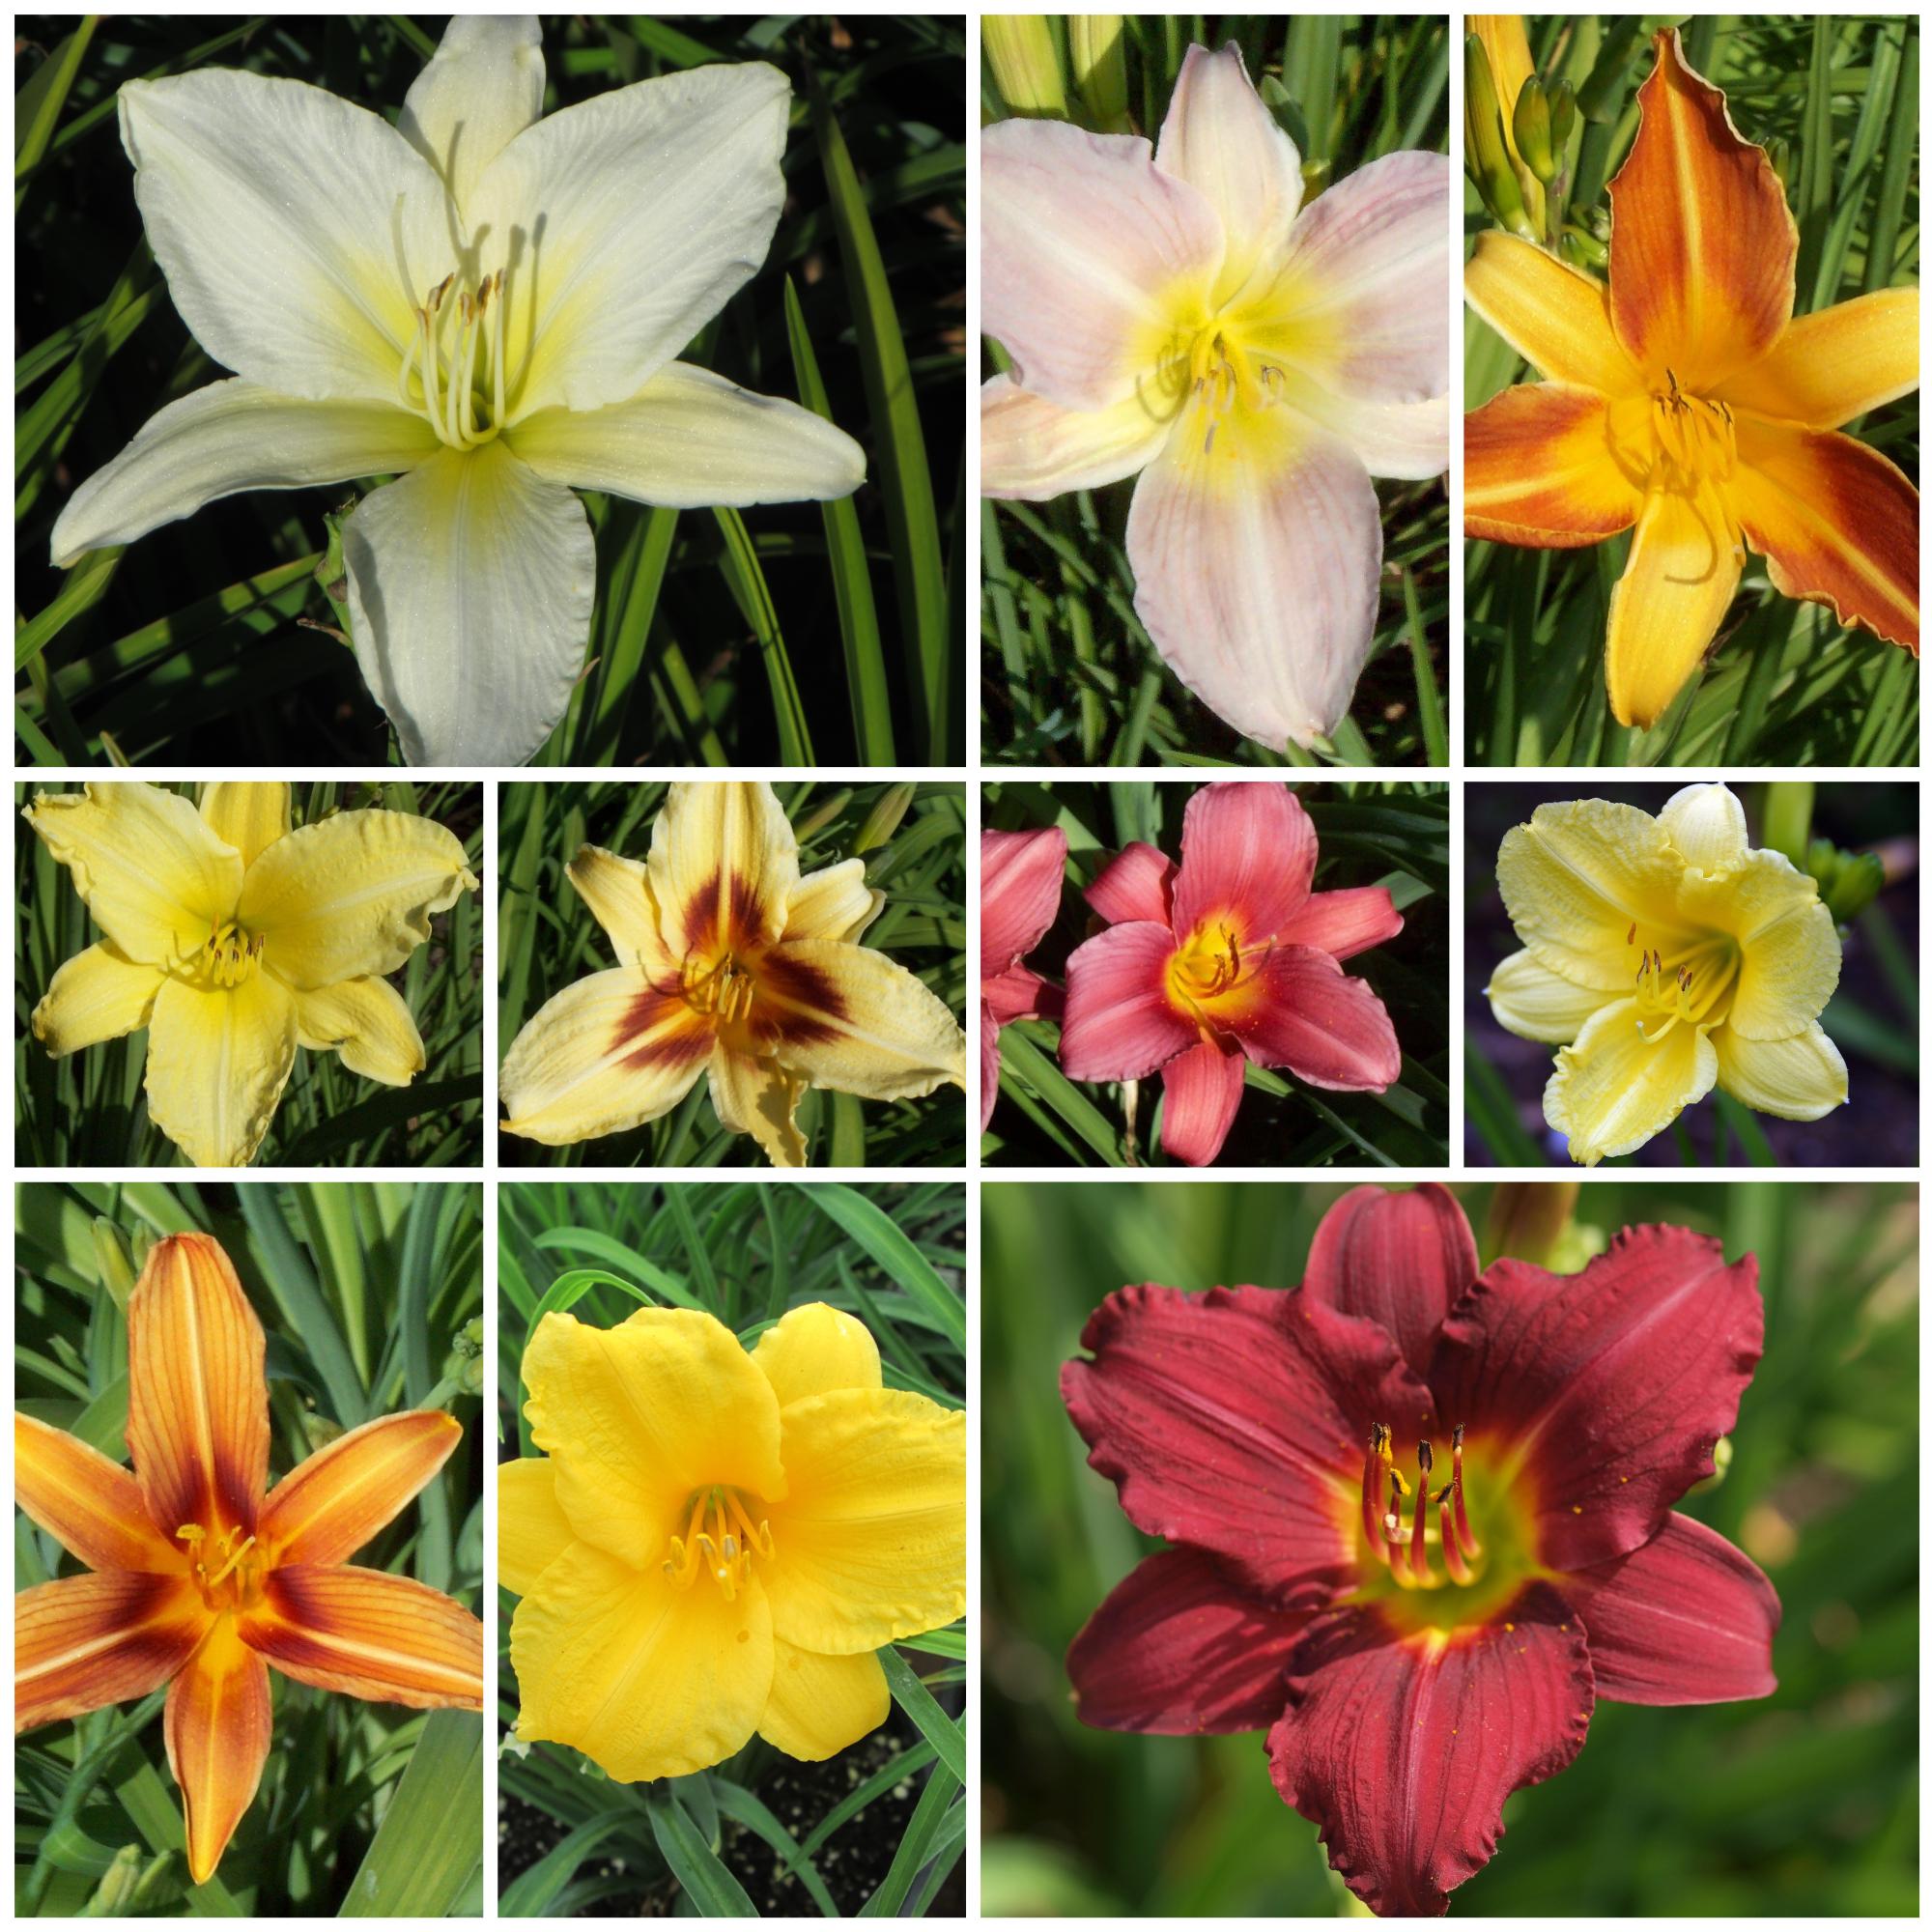 Sampler - Standard Daylily Collection from Leo Berbee Bulb Company